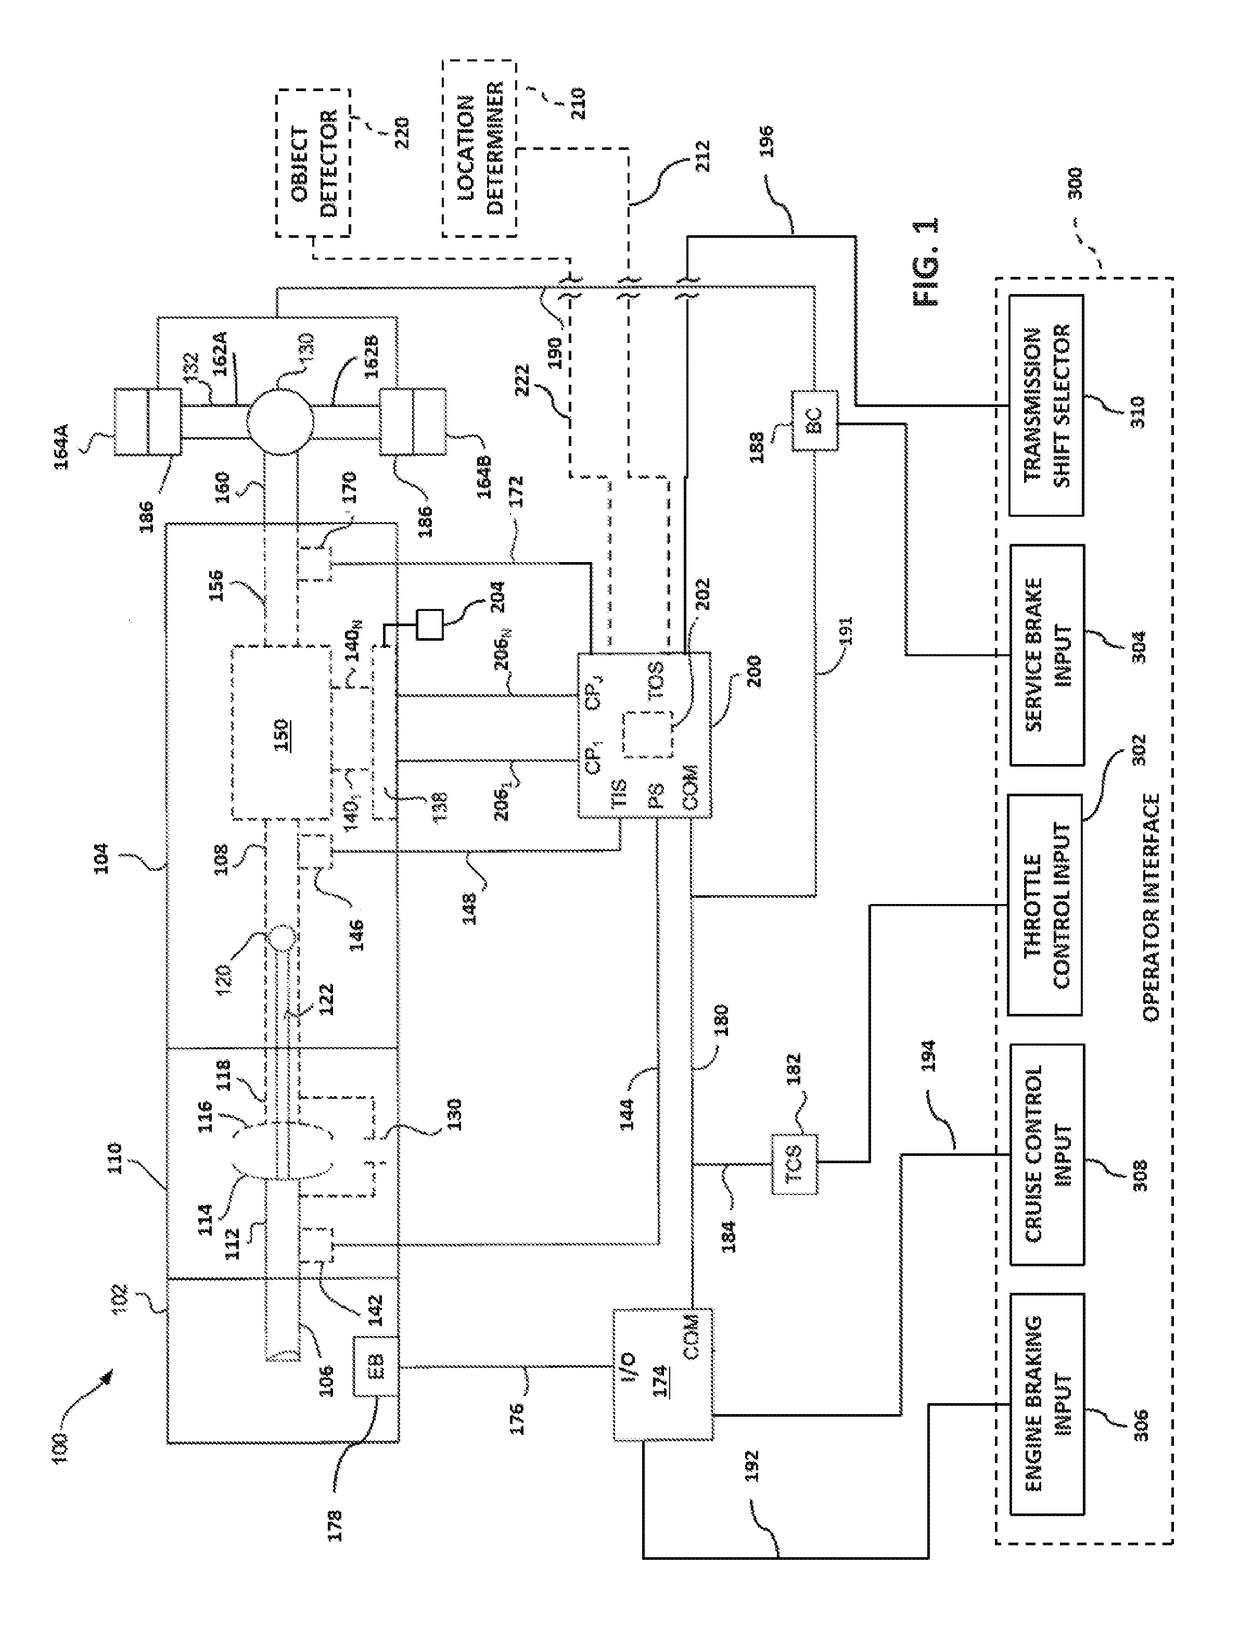 Manual shifting control system and method for multi-speed automatic transmission